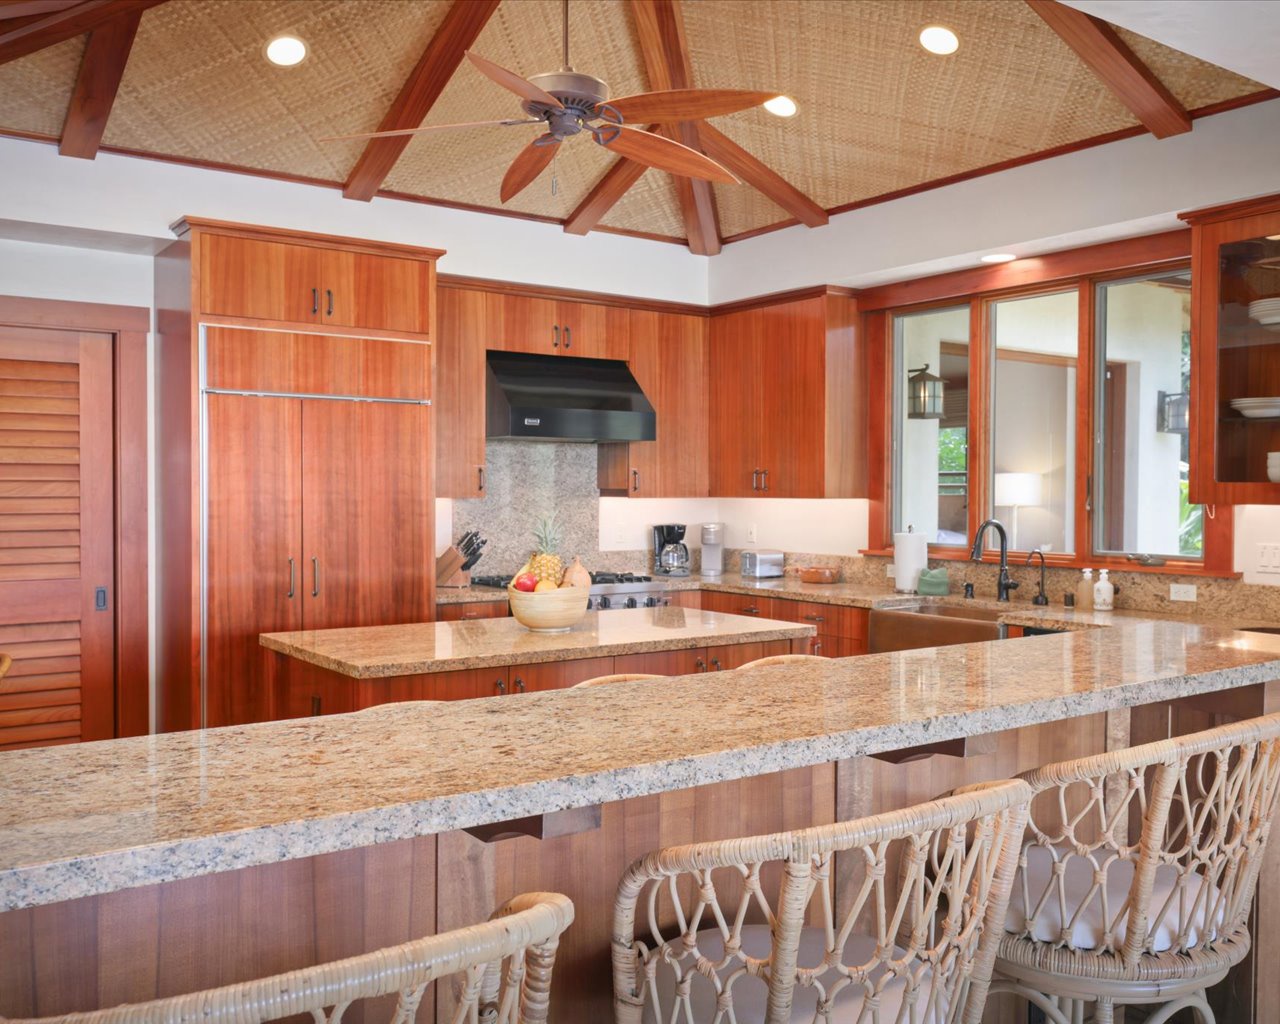 Kailua Kona Vacation Rentals, 3BD Pakui Street (131) Estate Home at Four Seasons Resort at Hualalai - Gleaming granite & top-tier appliances- a chef’s delight